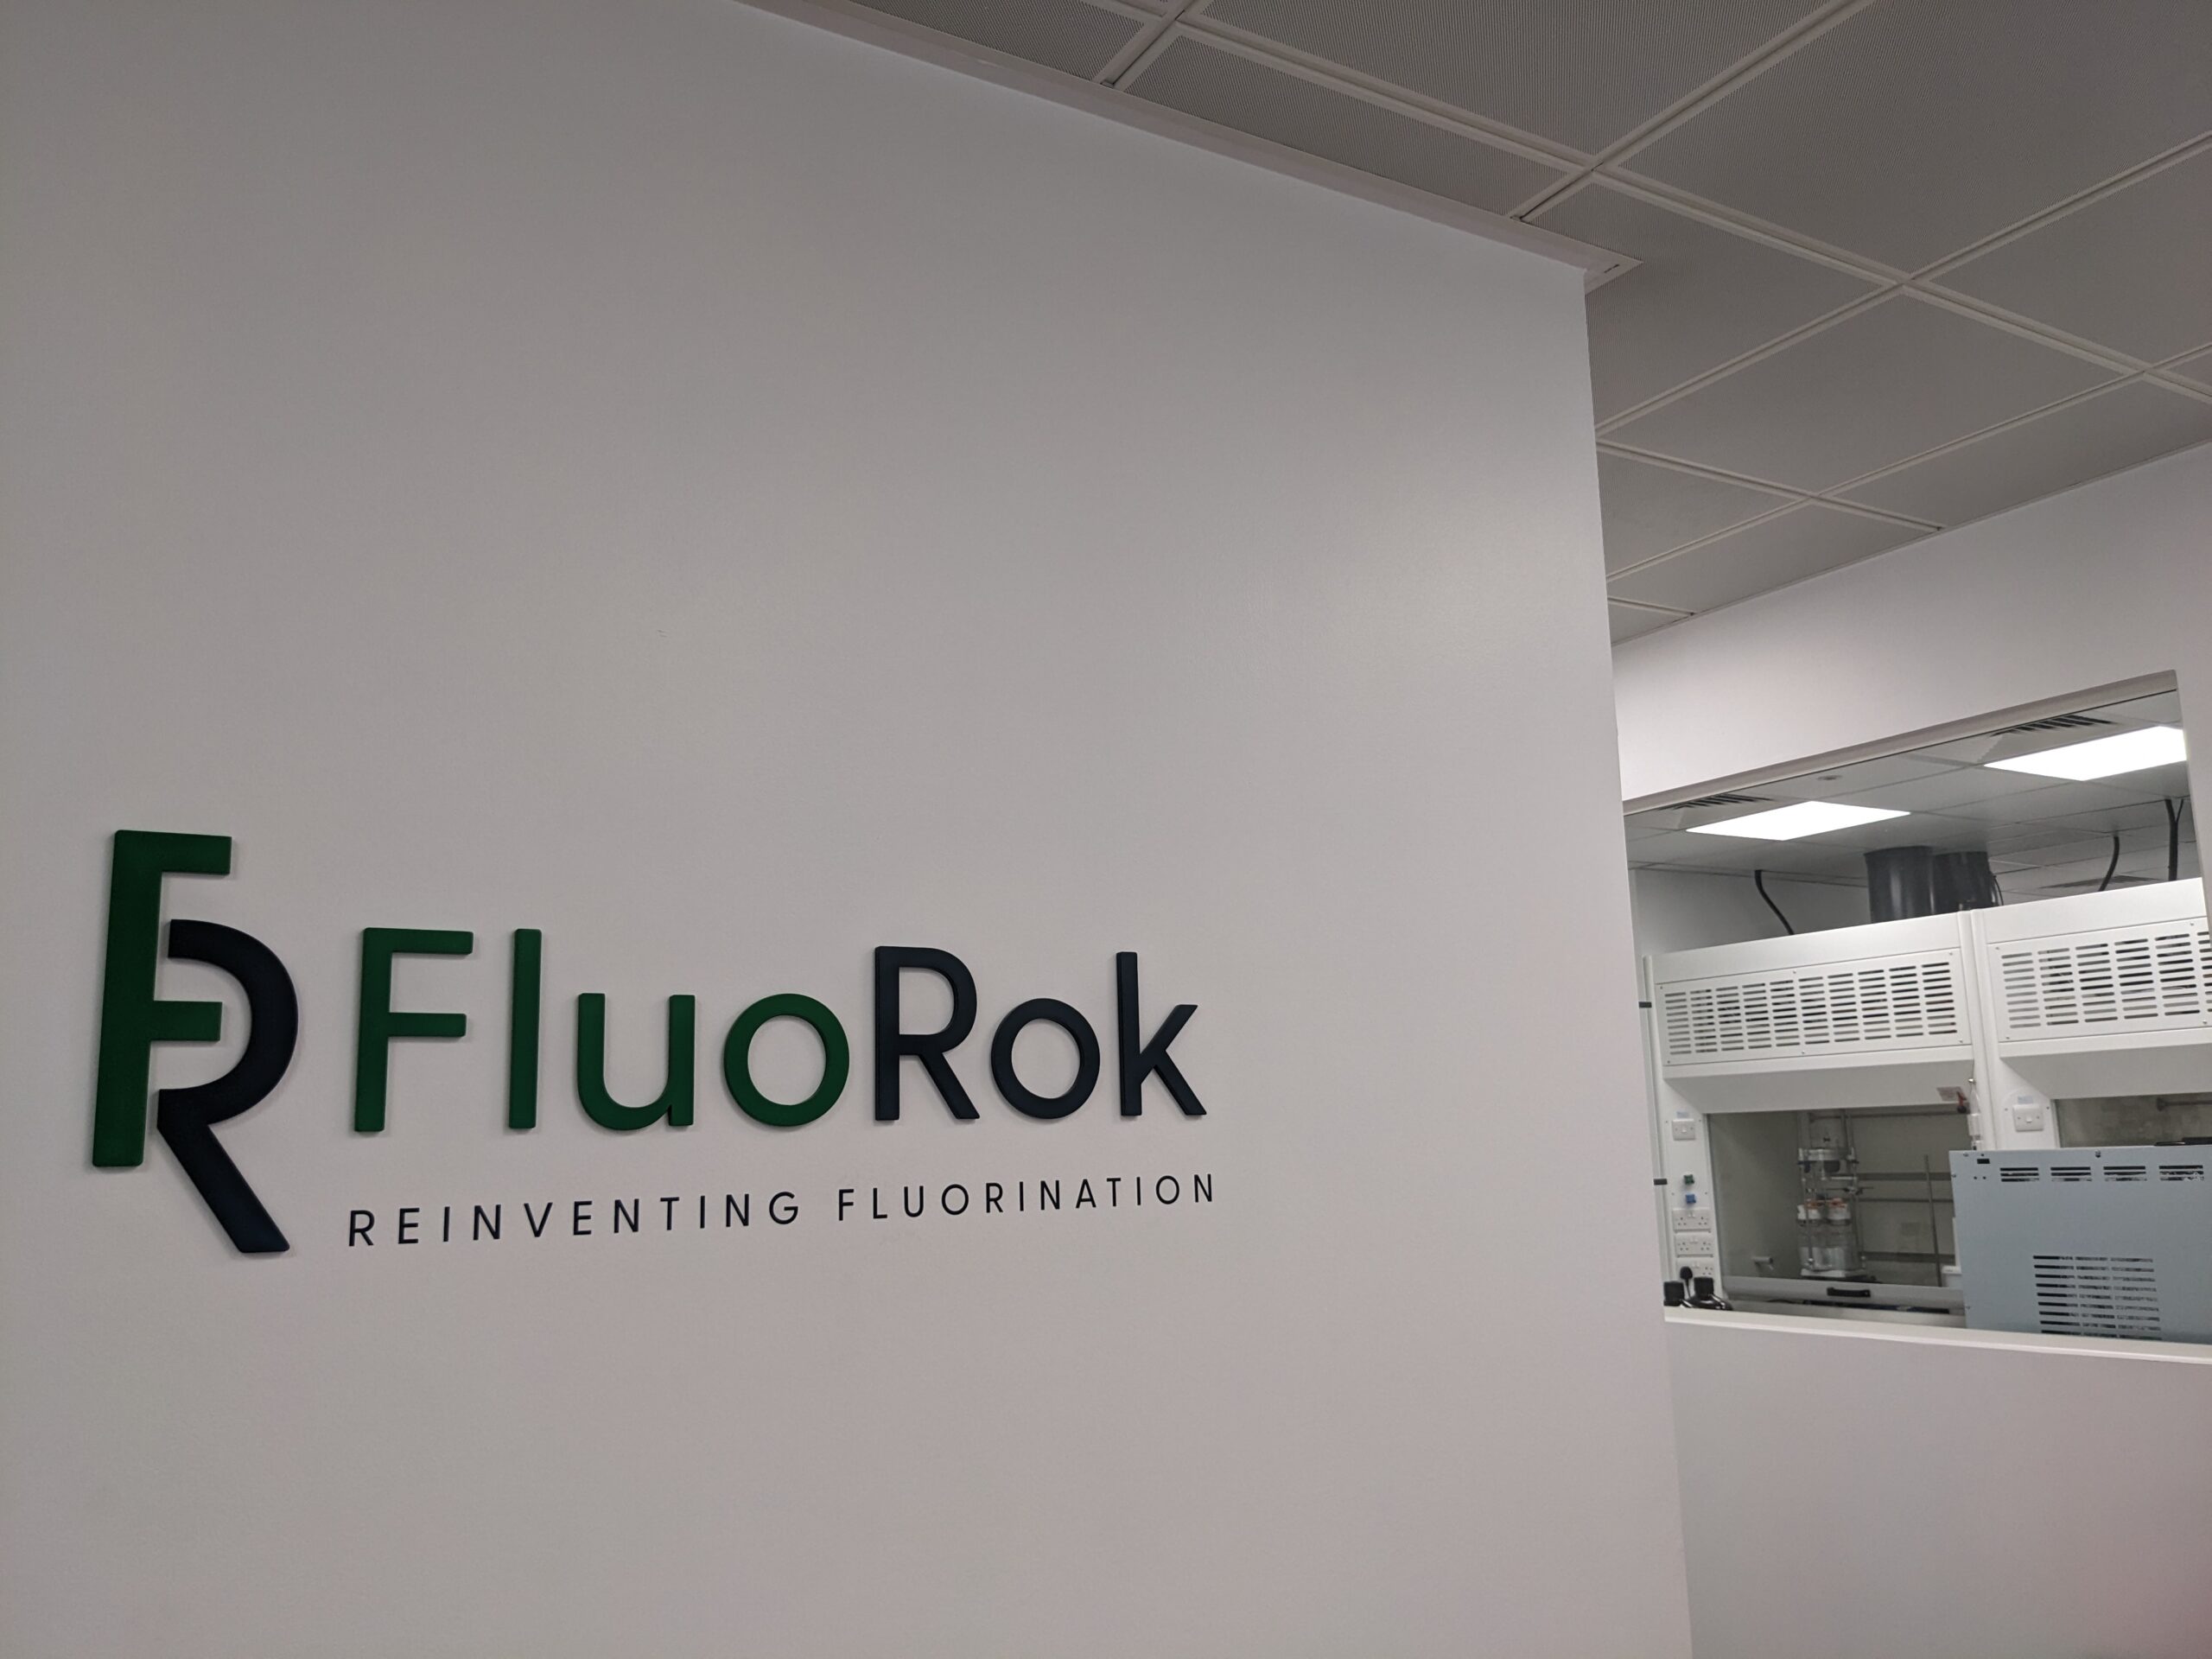 FluoRok moves to bespoke new facility to accelerate commercialization